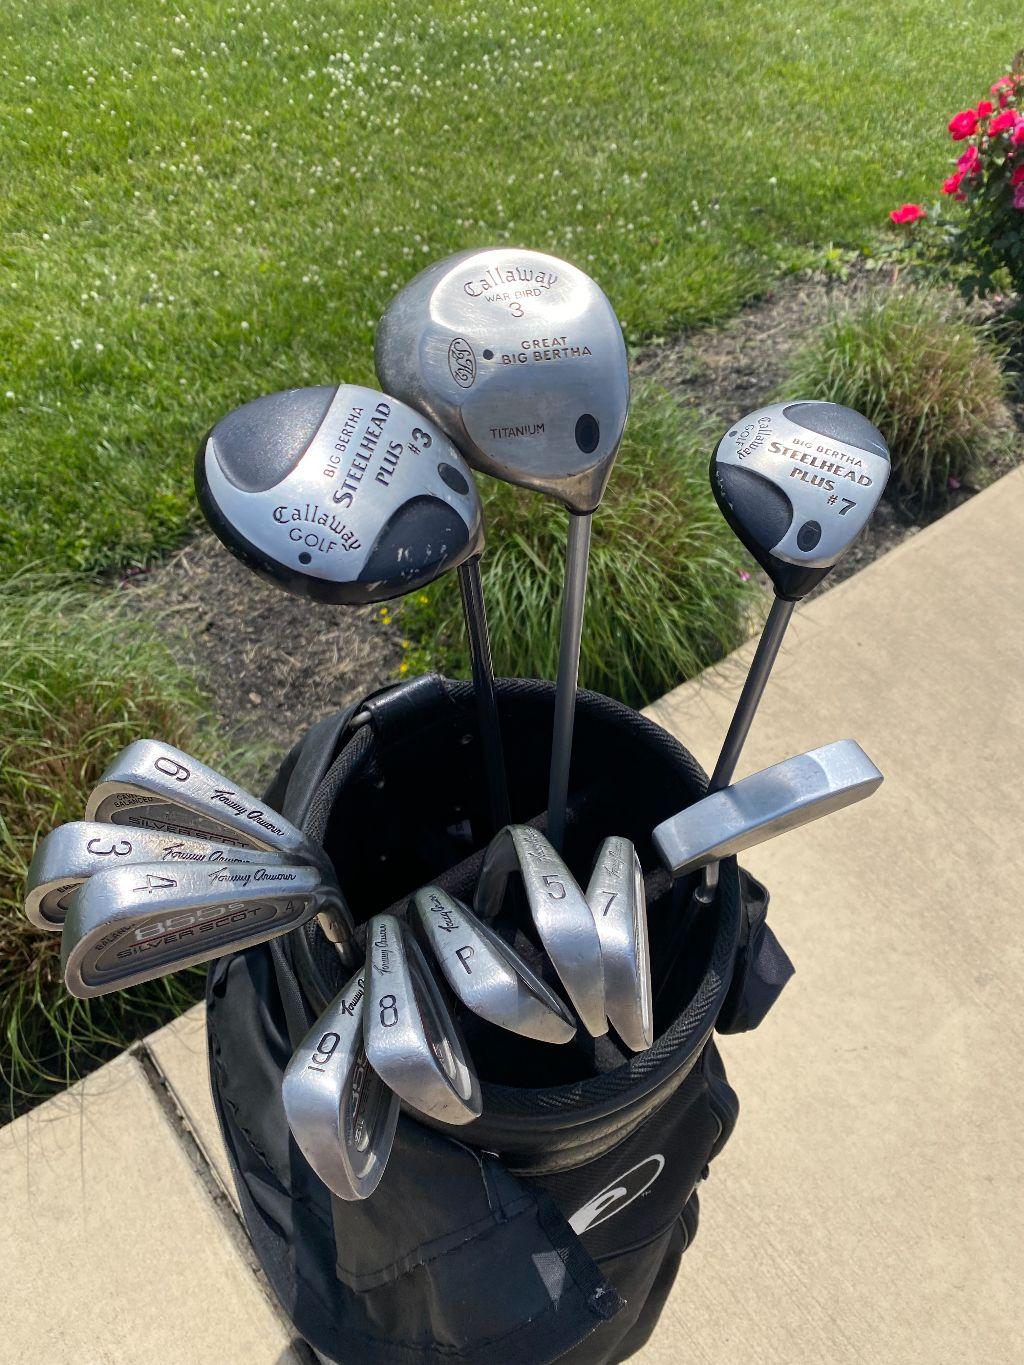 New to You Set of Golf Clubs